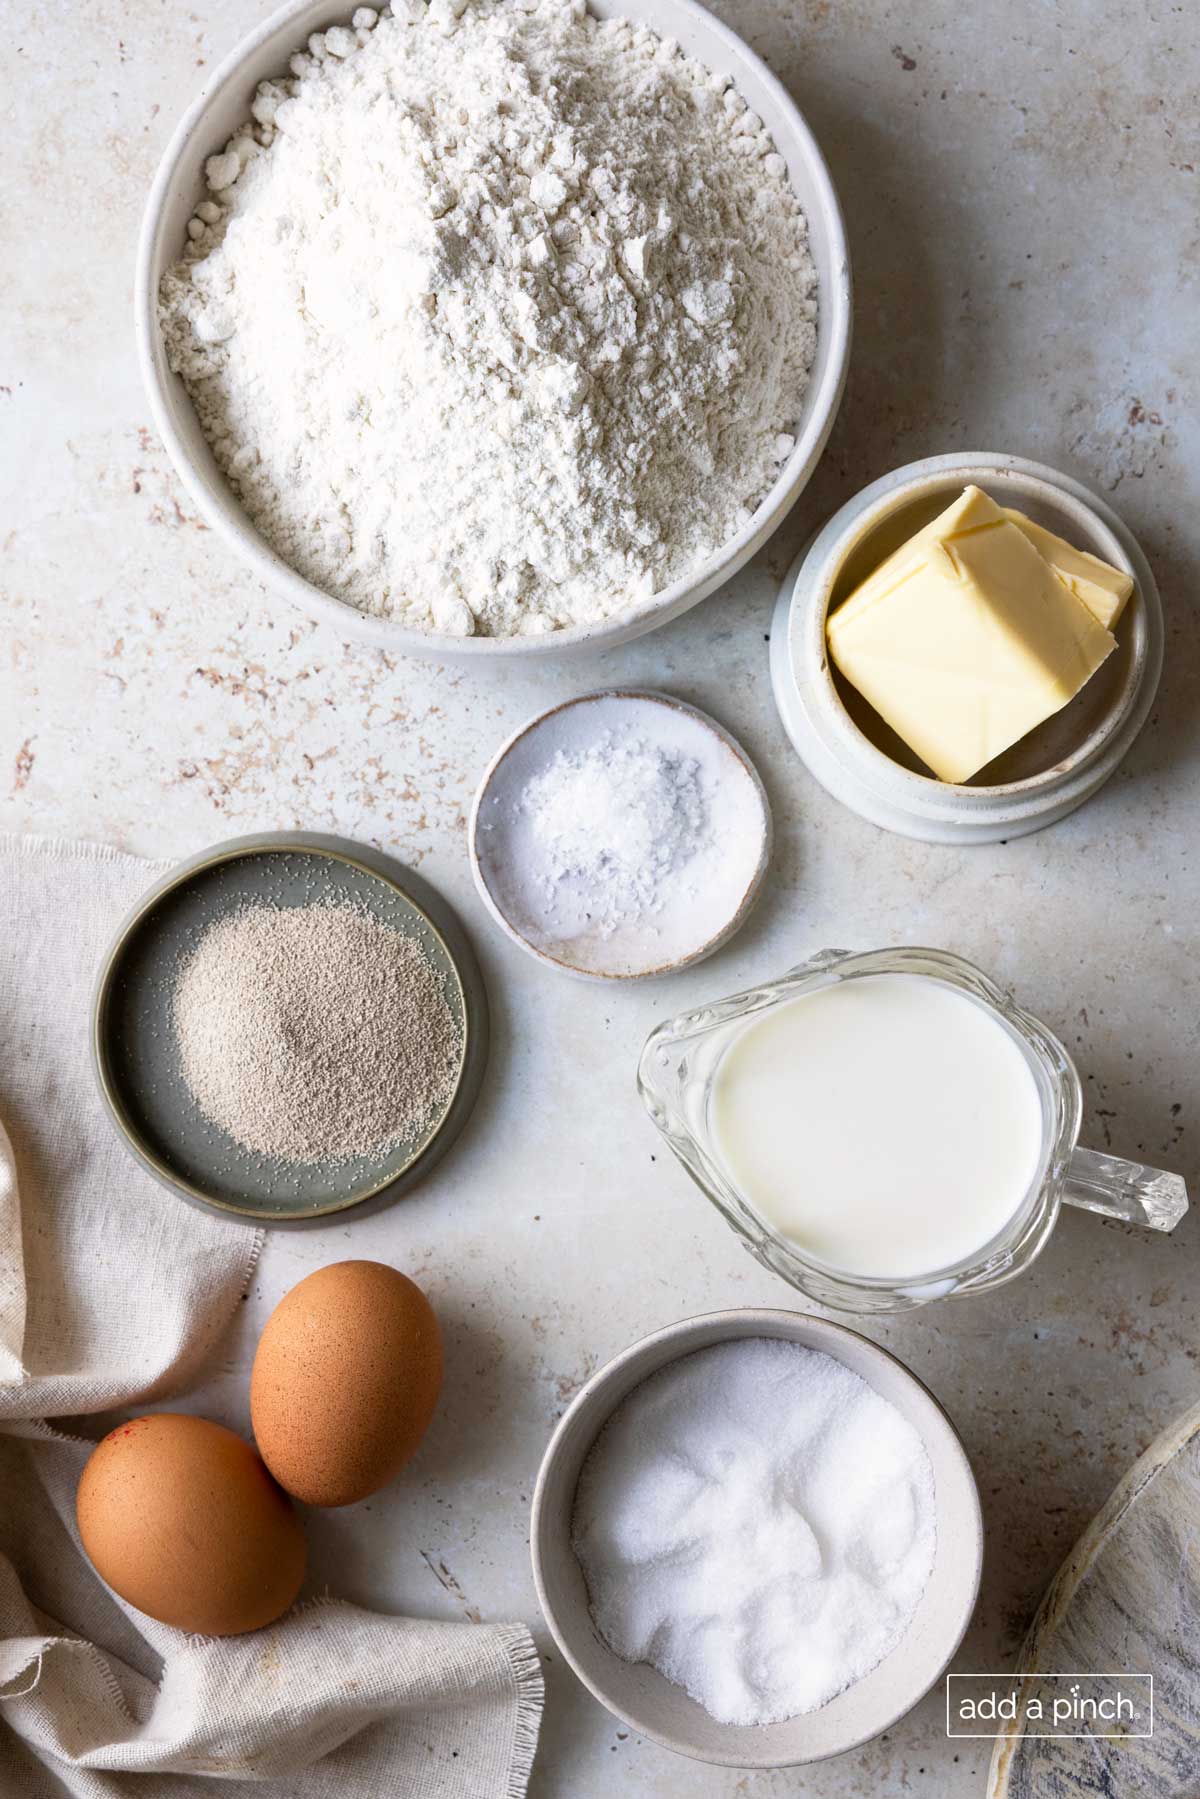 Marble countertop holds containers of ingredients for Cinnamon Roll recipe -  flour, yeast, butter, cinnamon, sugar, eggs, salt, and milk. 